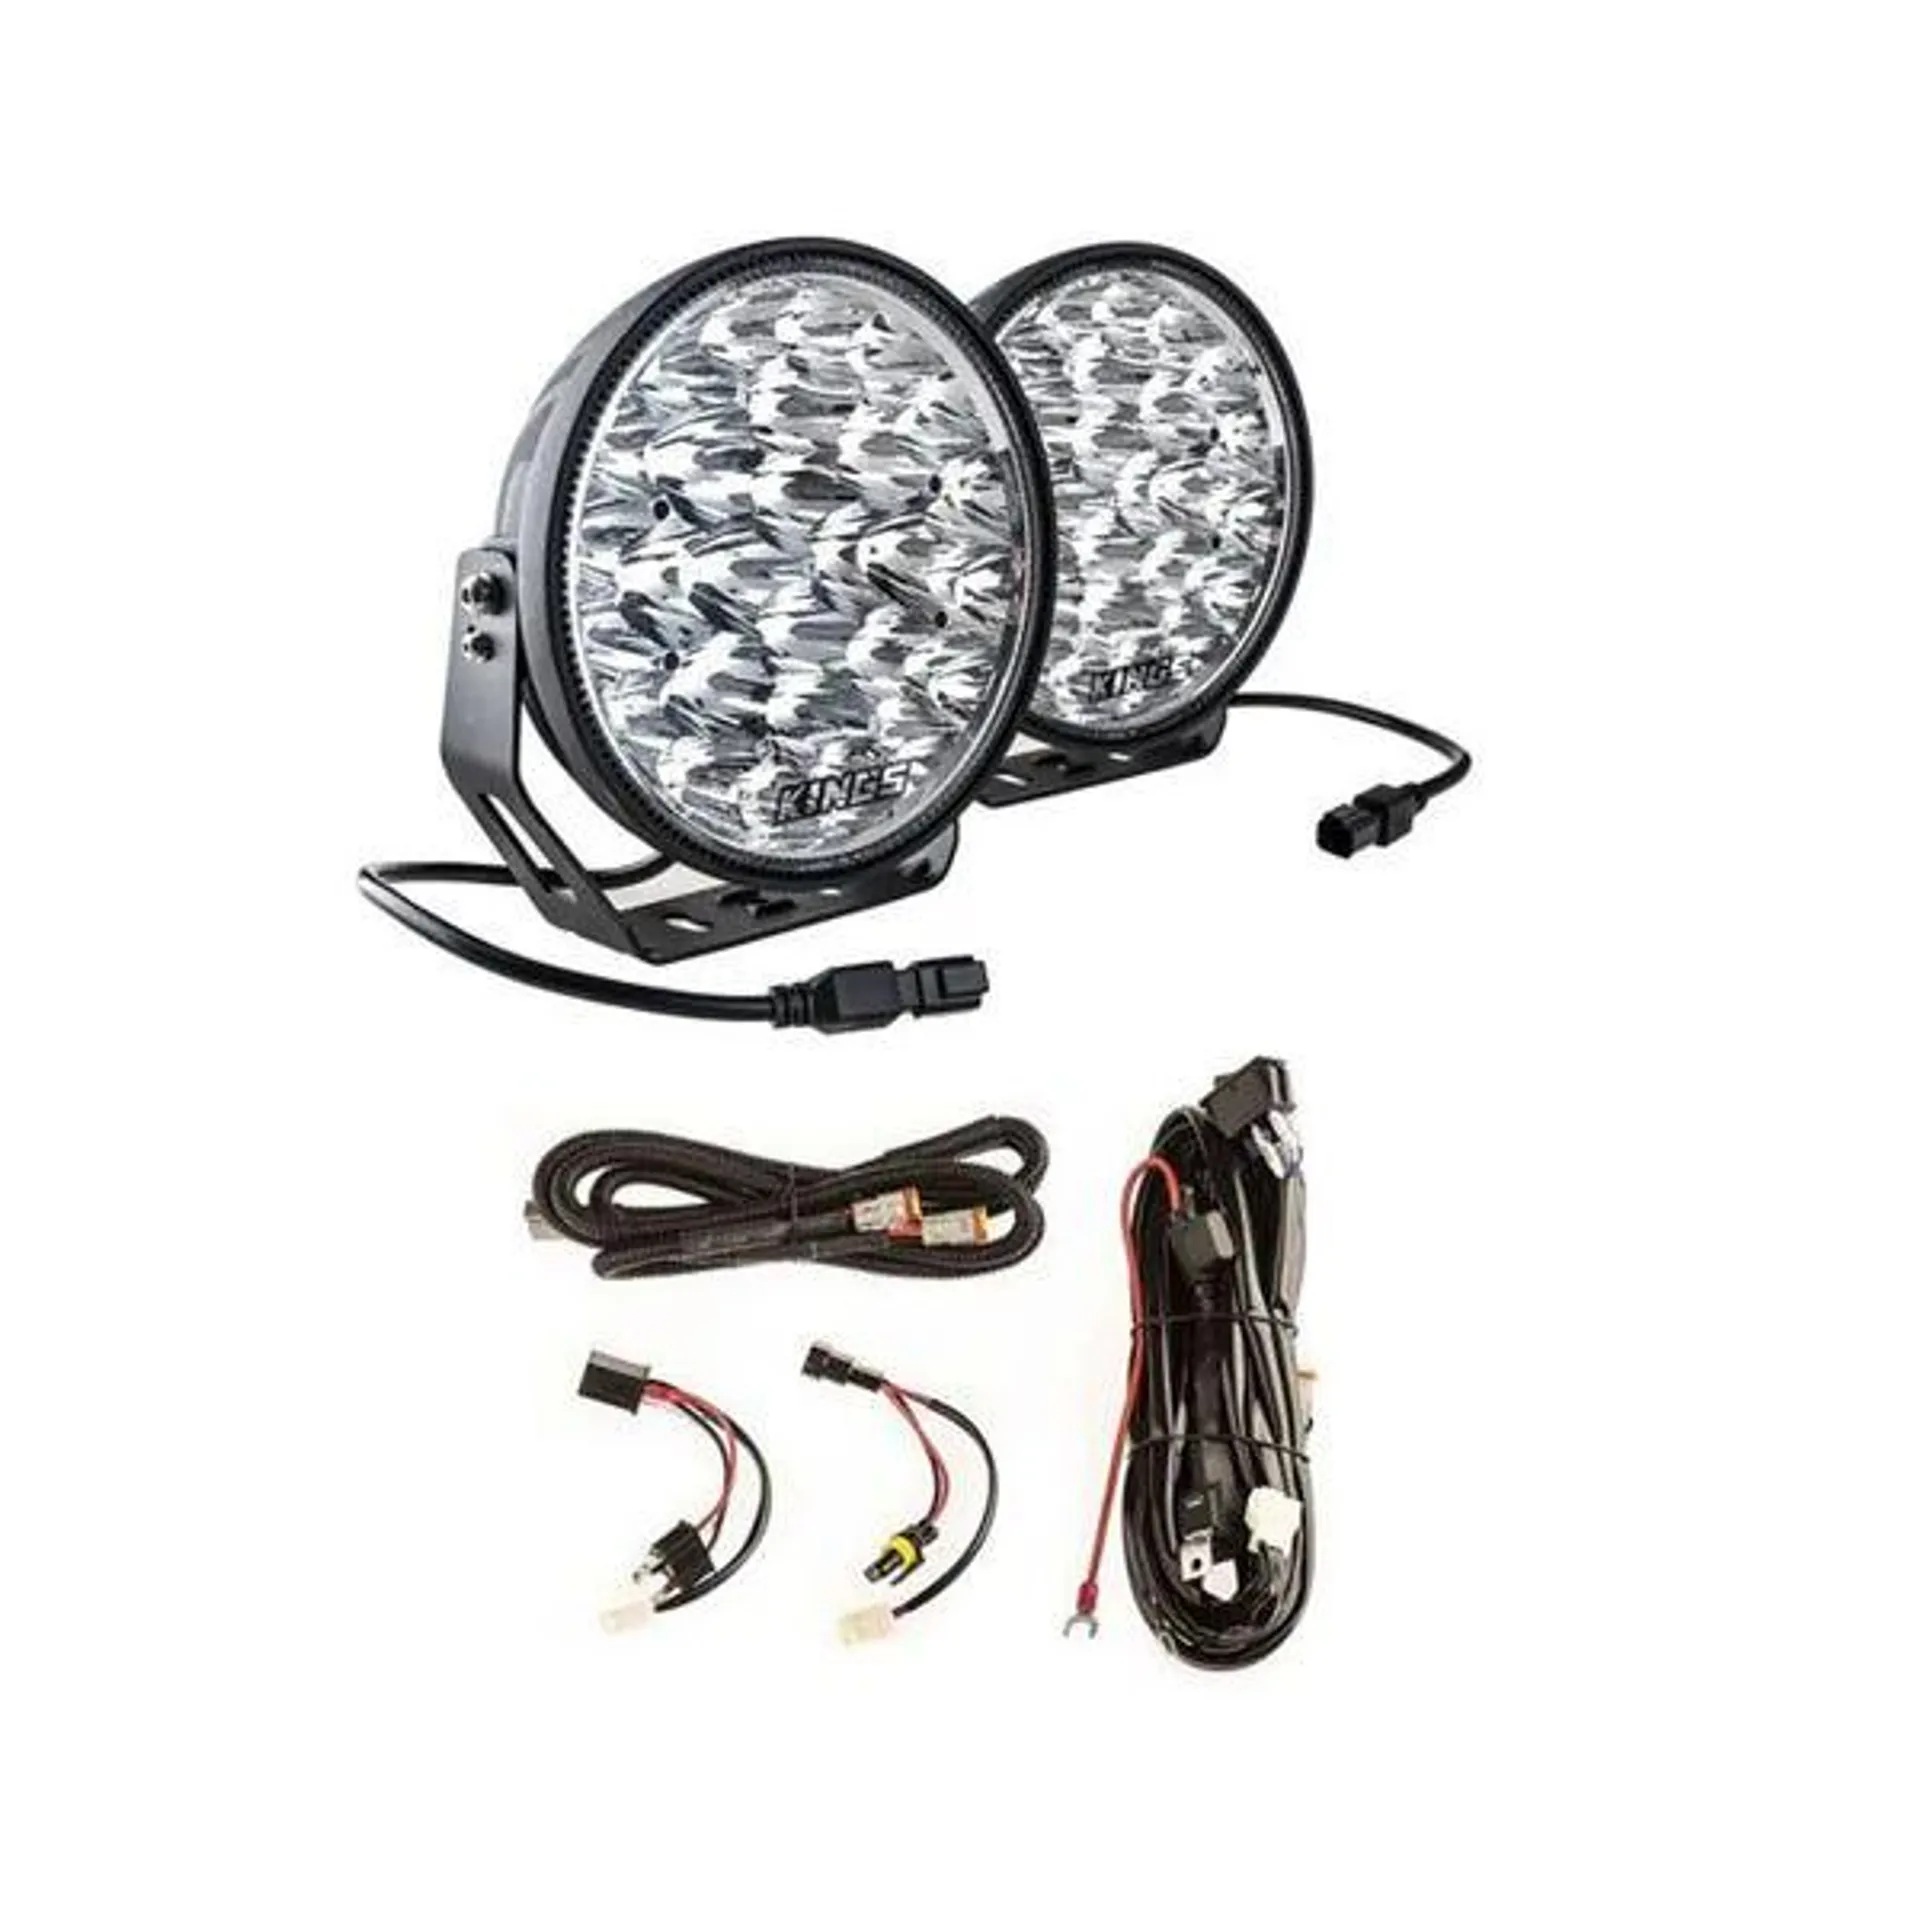 Adventure Kings Domin8r Xtreme 9” LED Driving Lights (Pair) + Plug N Play Smart Wiring Harness Kit